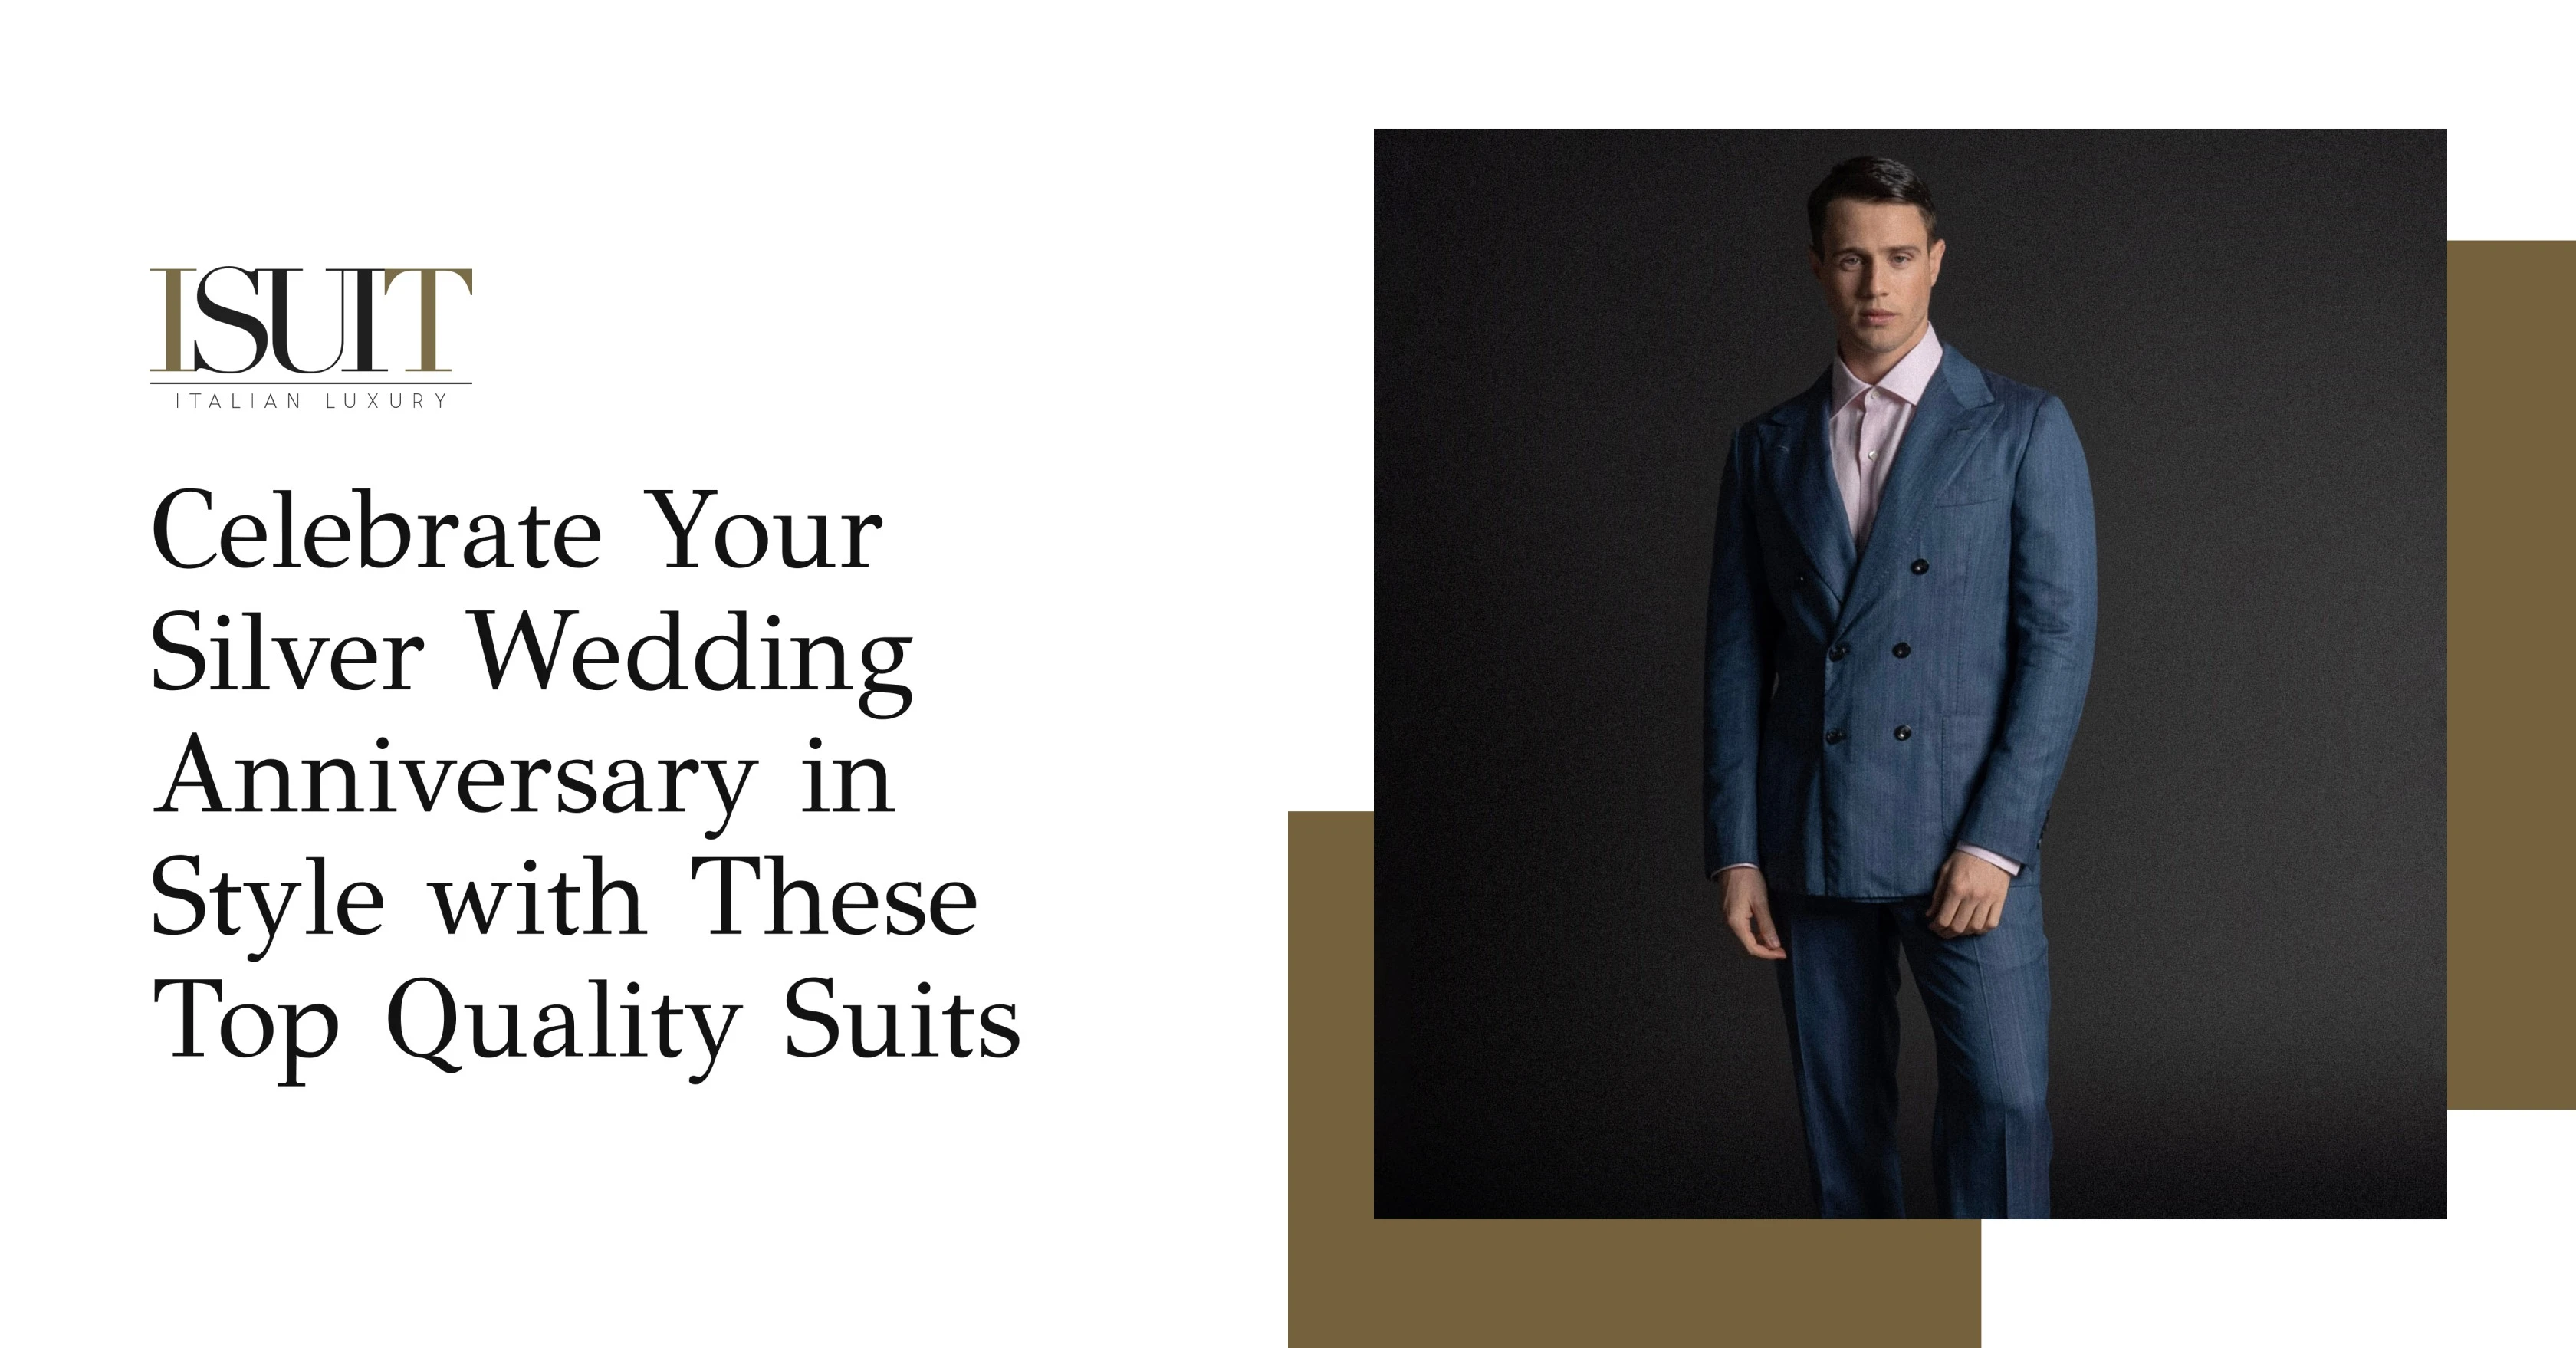 Celebrate Your Silver Wedding Anniversary in Style with These Top Quality Suits